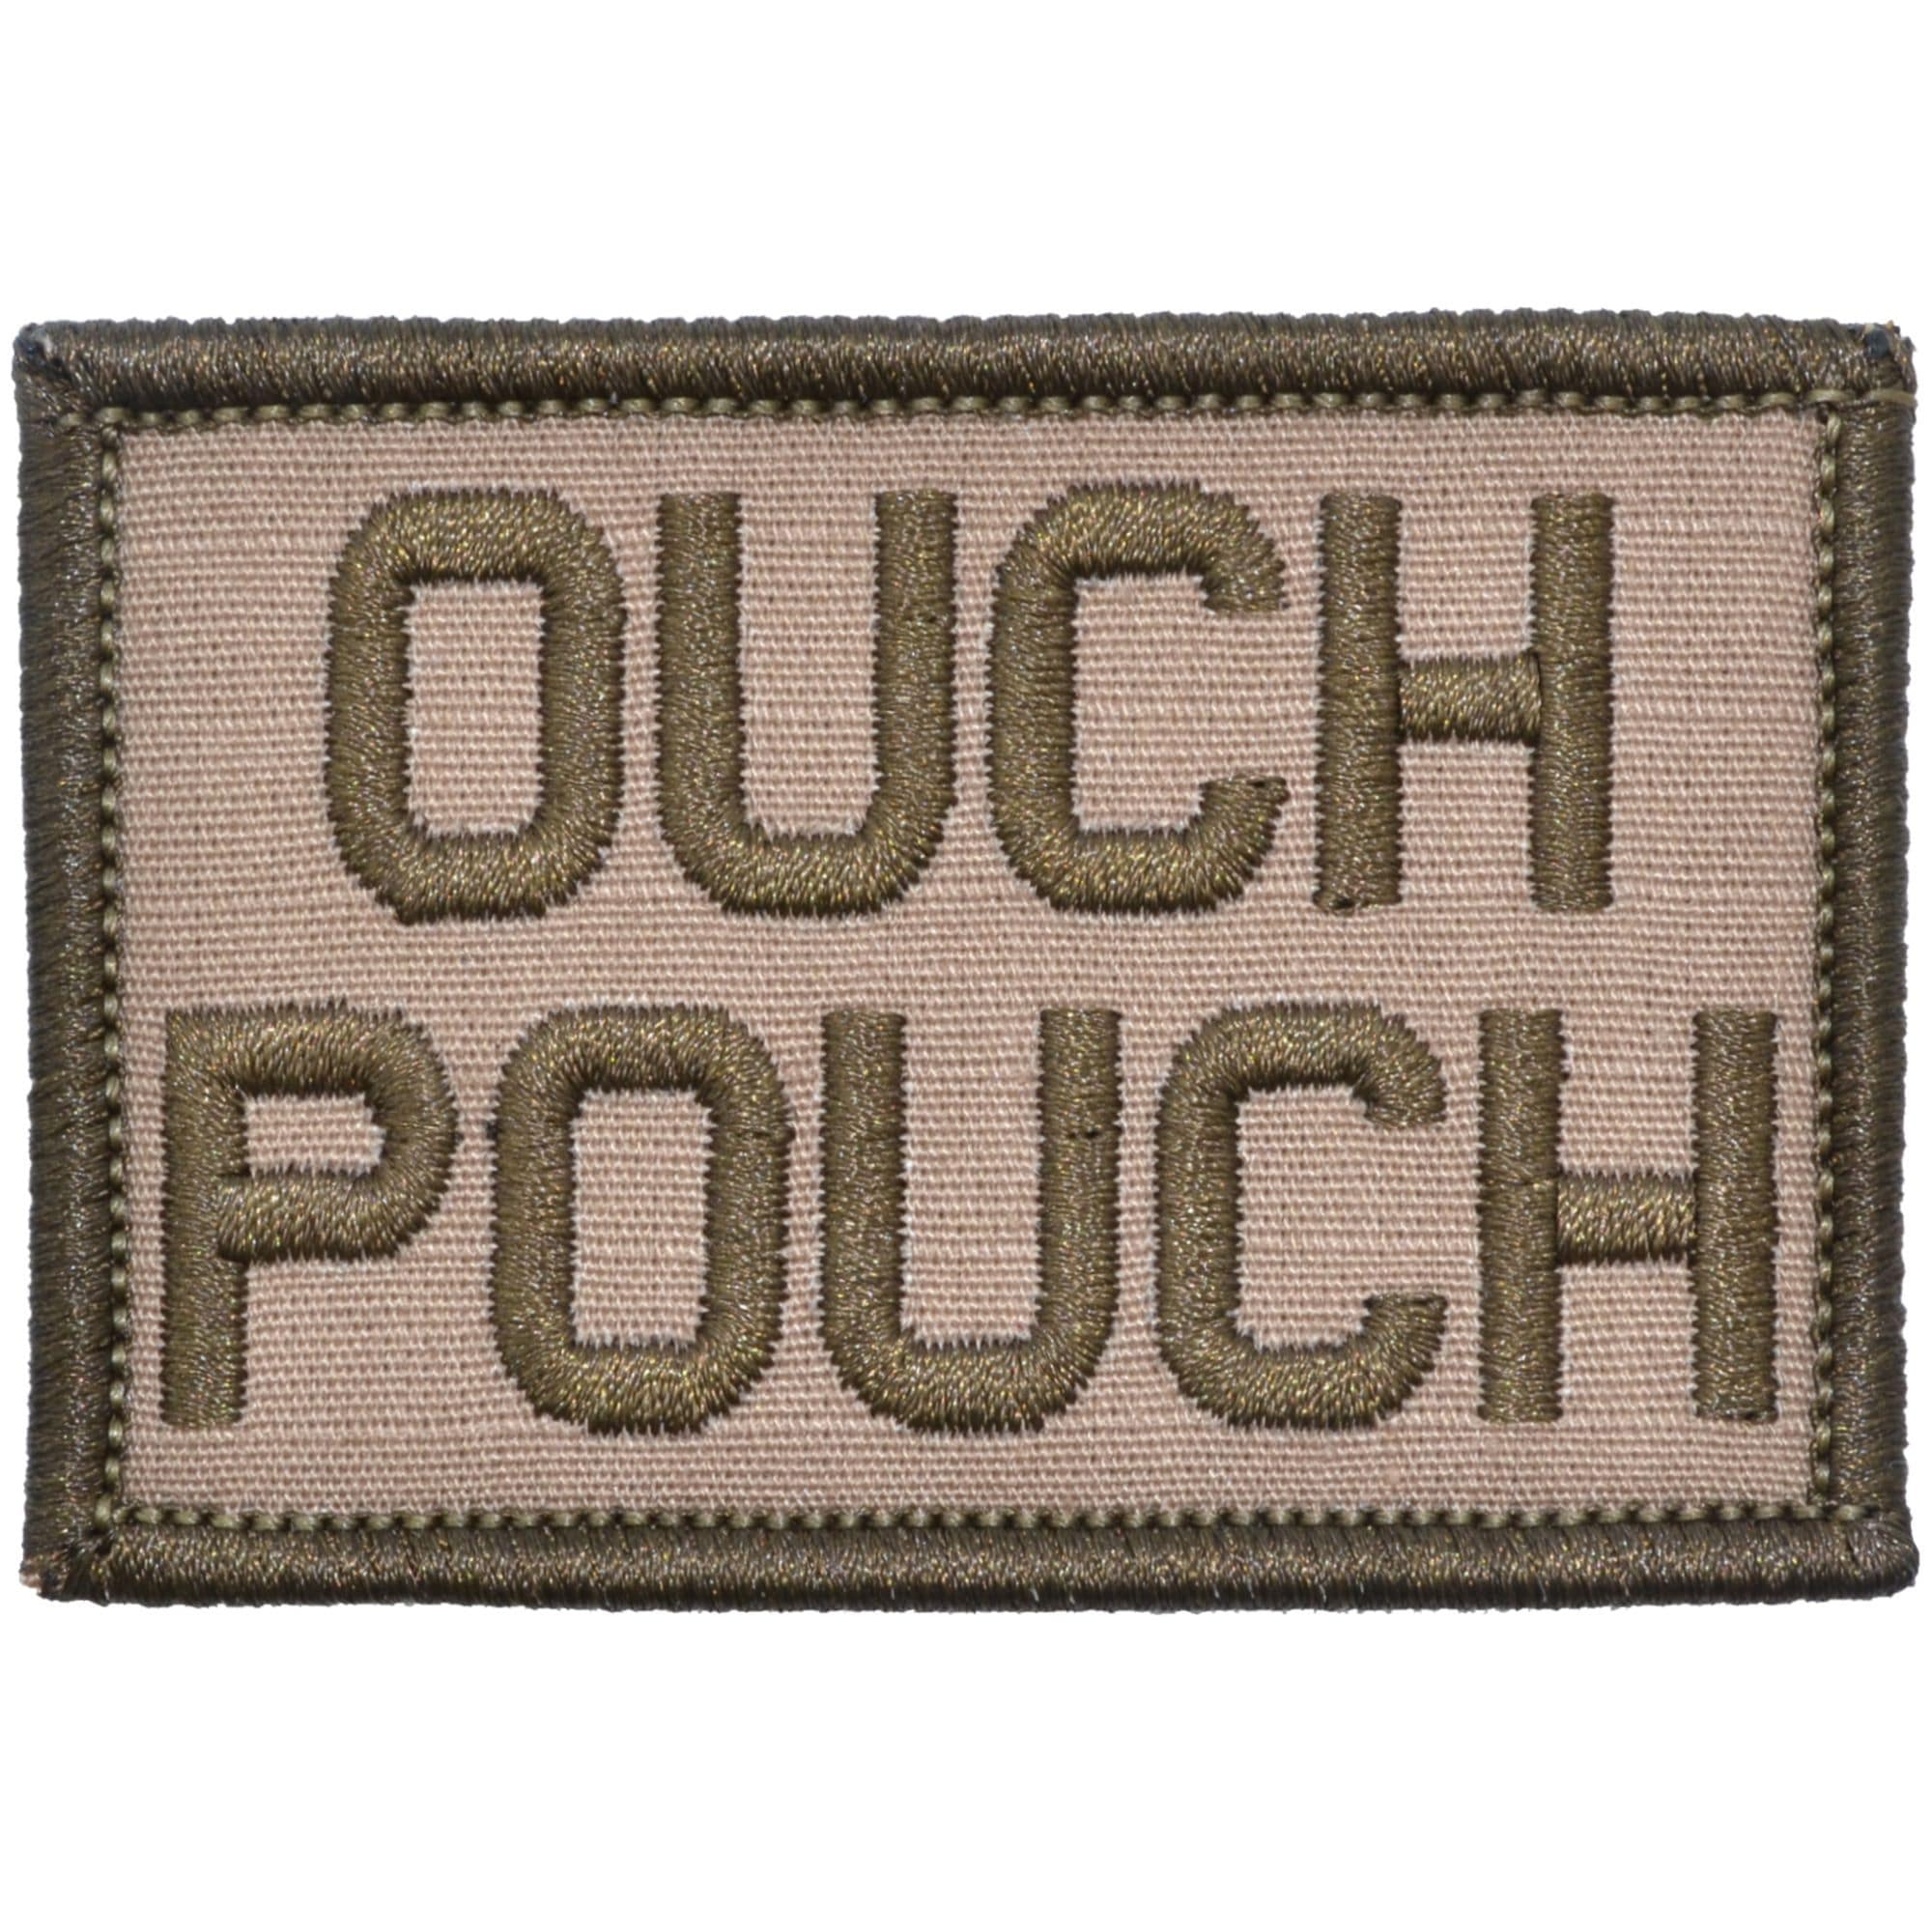 Tactical Gear Junkie Patches Coyote Brown Ouch Pouch - 2x3 Patch